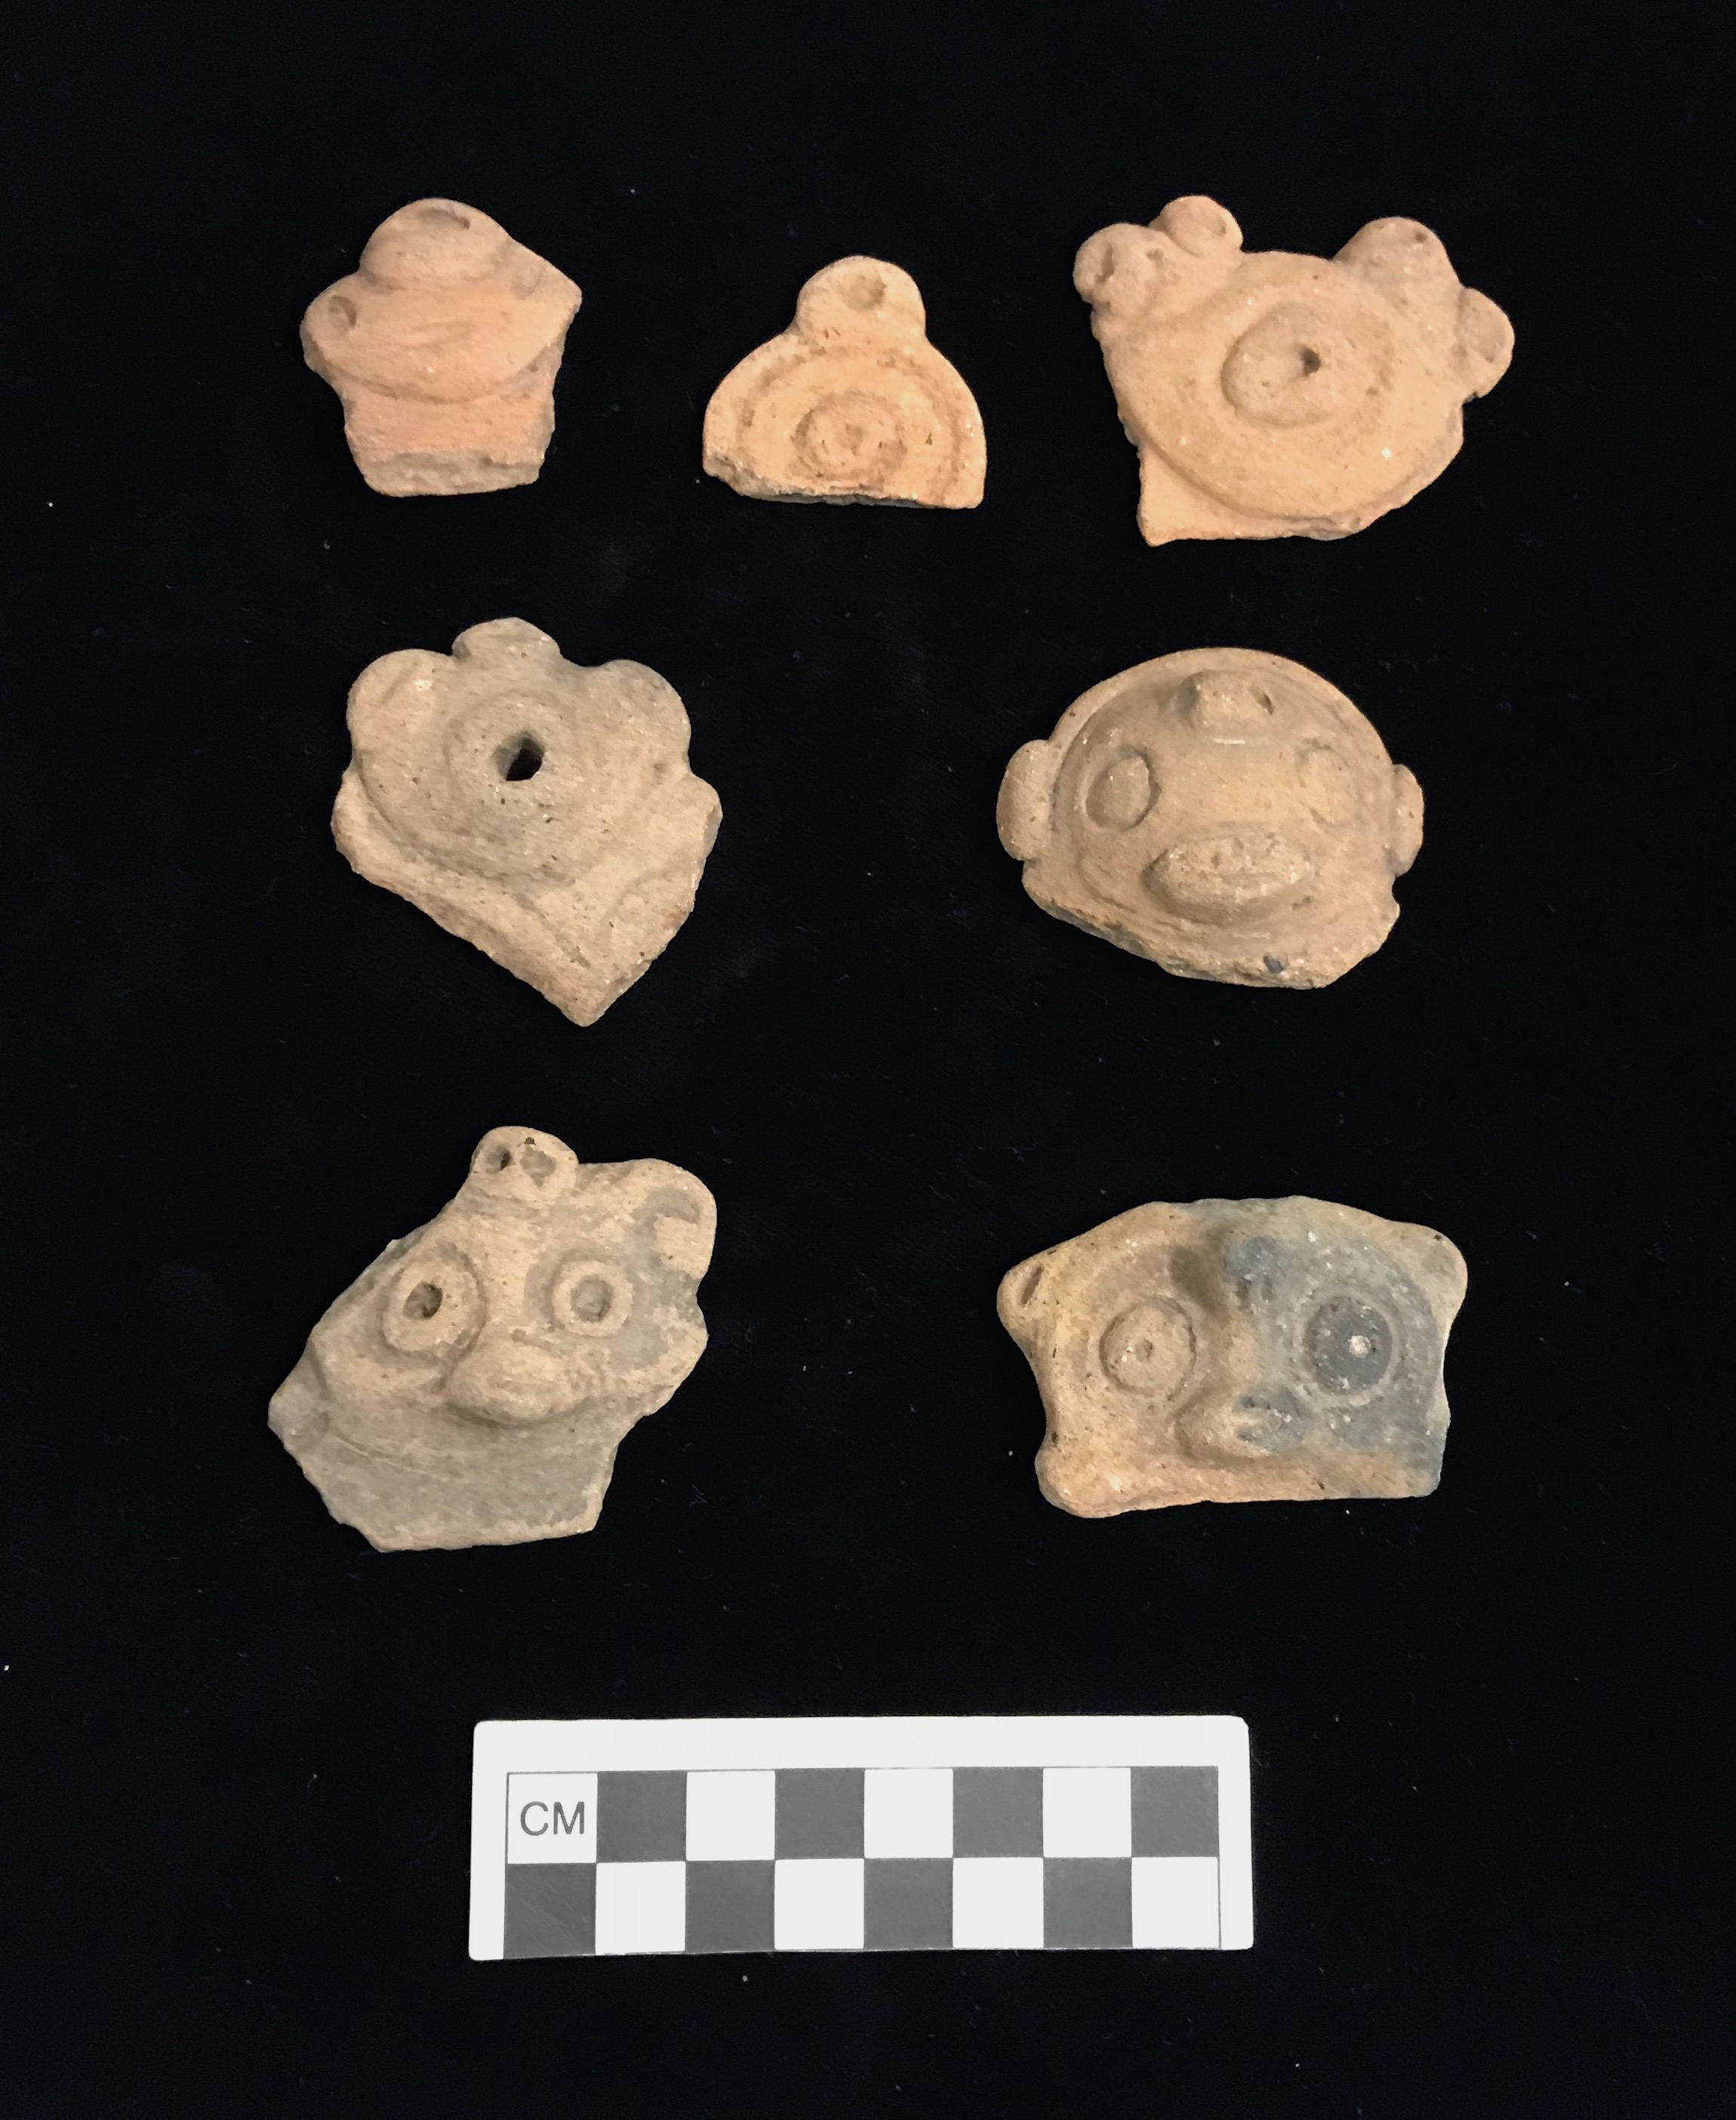 Plate III. PEARLS RIM ADORNED SHERDS (Sub-types 1 and 2). FLMNH Acc. Nos. 97991, 97992,97995, and 97996.